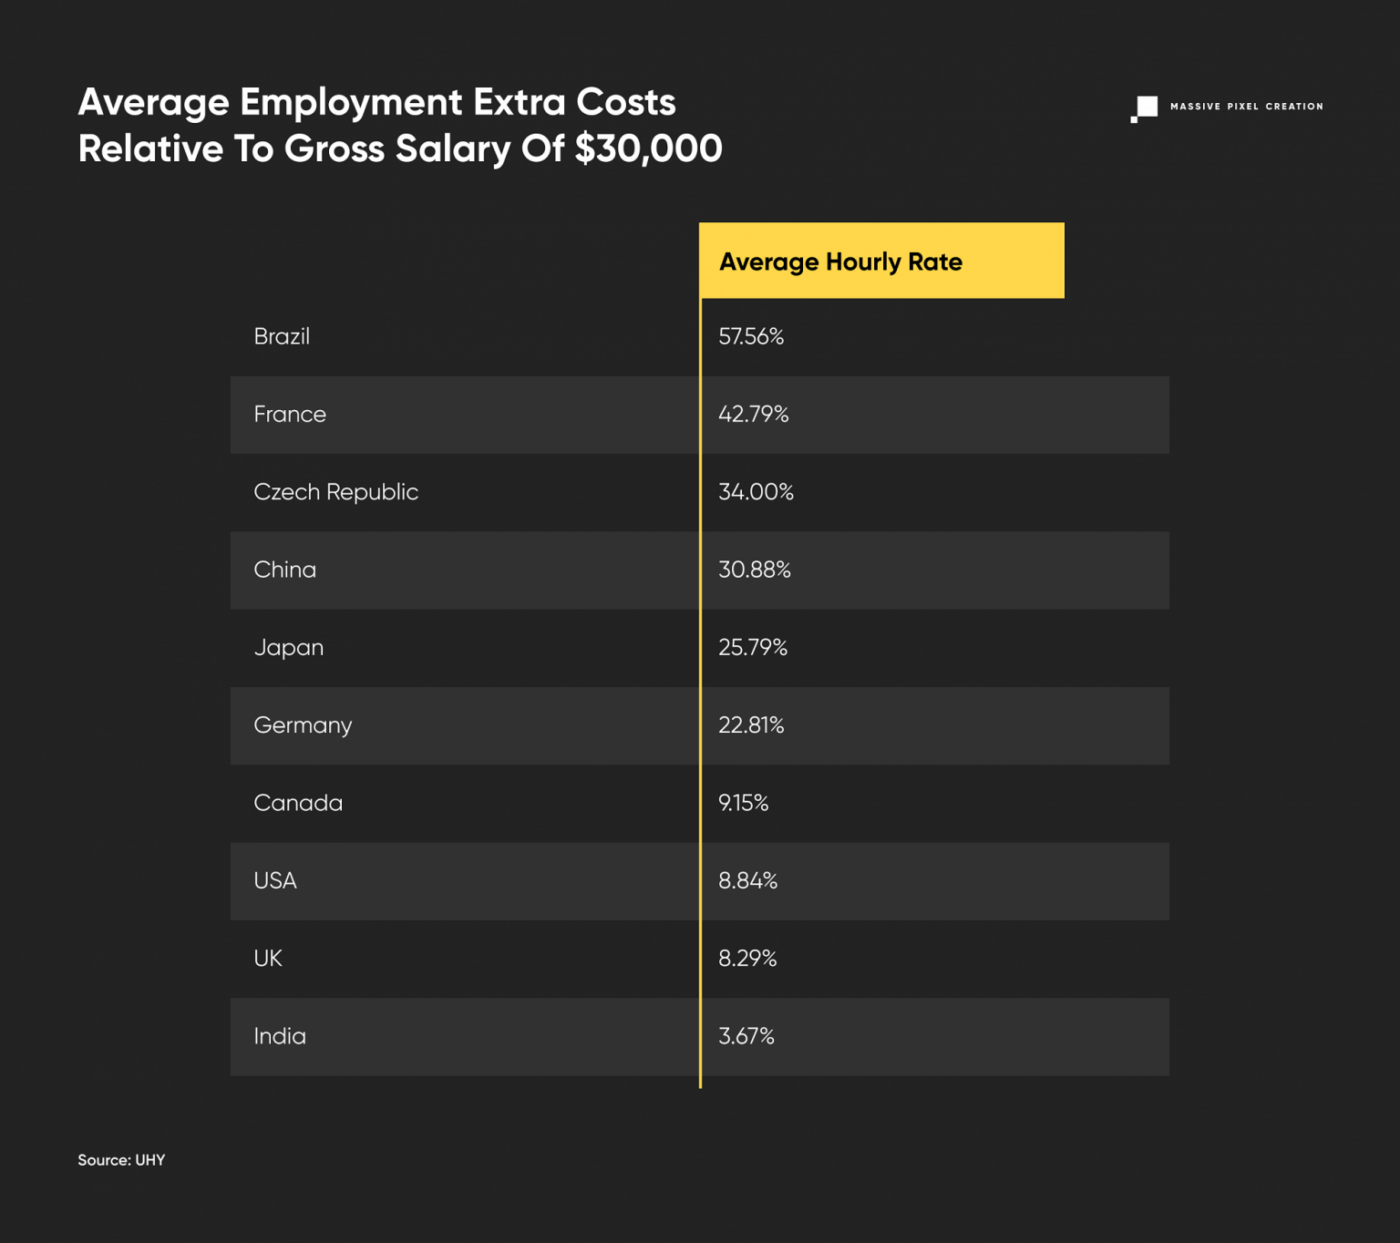 average-employment-extra-costs-table-1536x1364